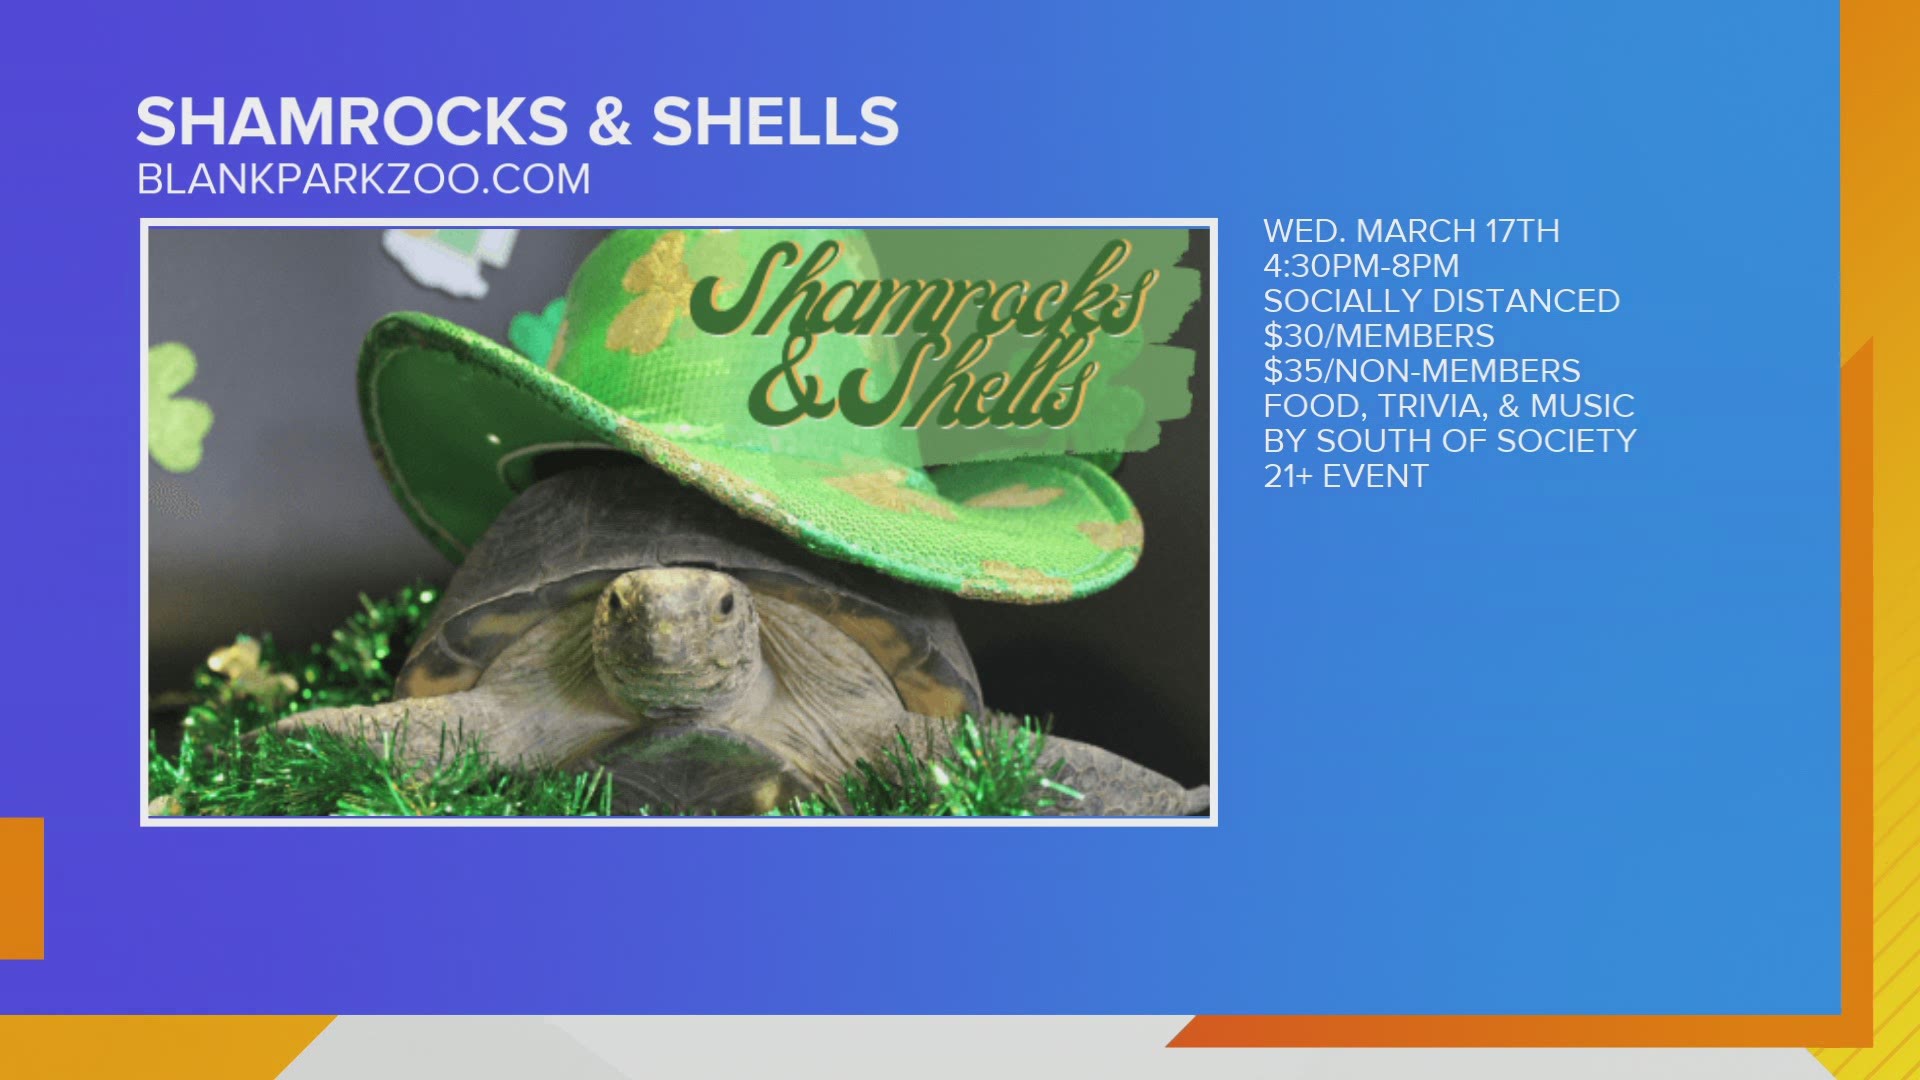 NEW Shamrocks & Shells event at the Blank Park Zoo on St Patrick's Day (Adults Only)